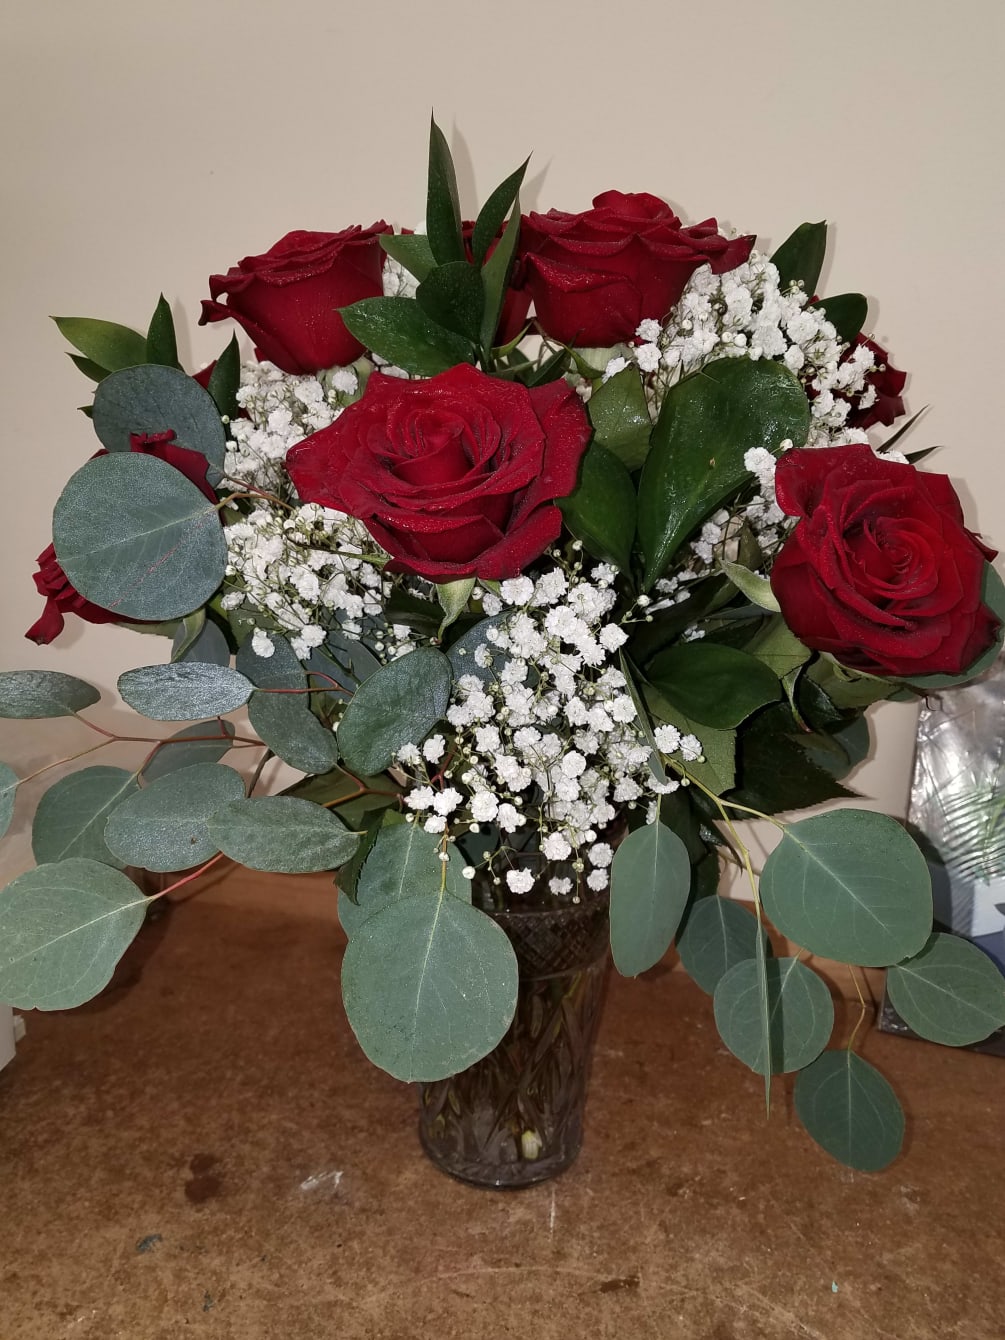 6 beautiful red roses in a vase with baby breath and greens